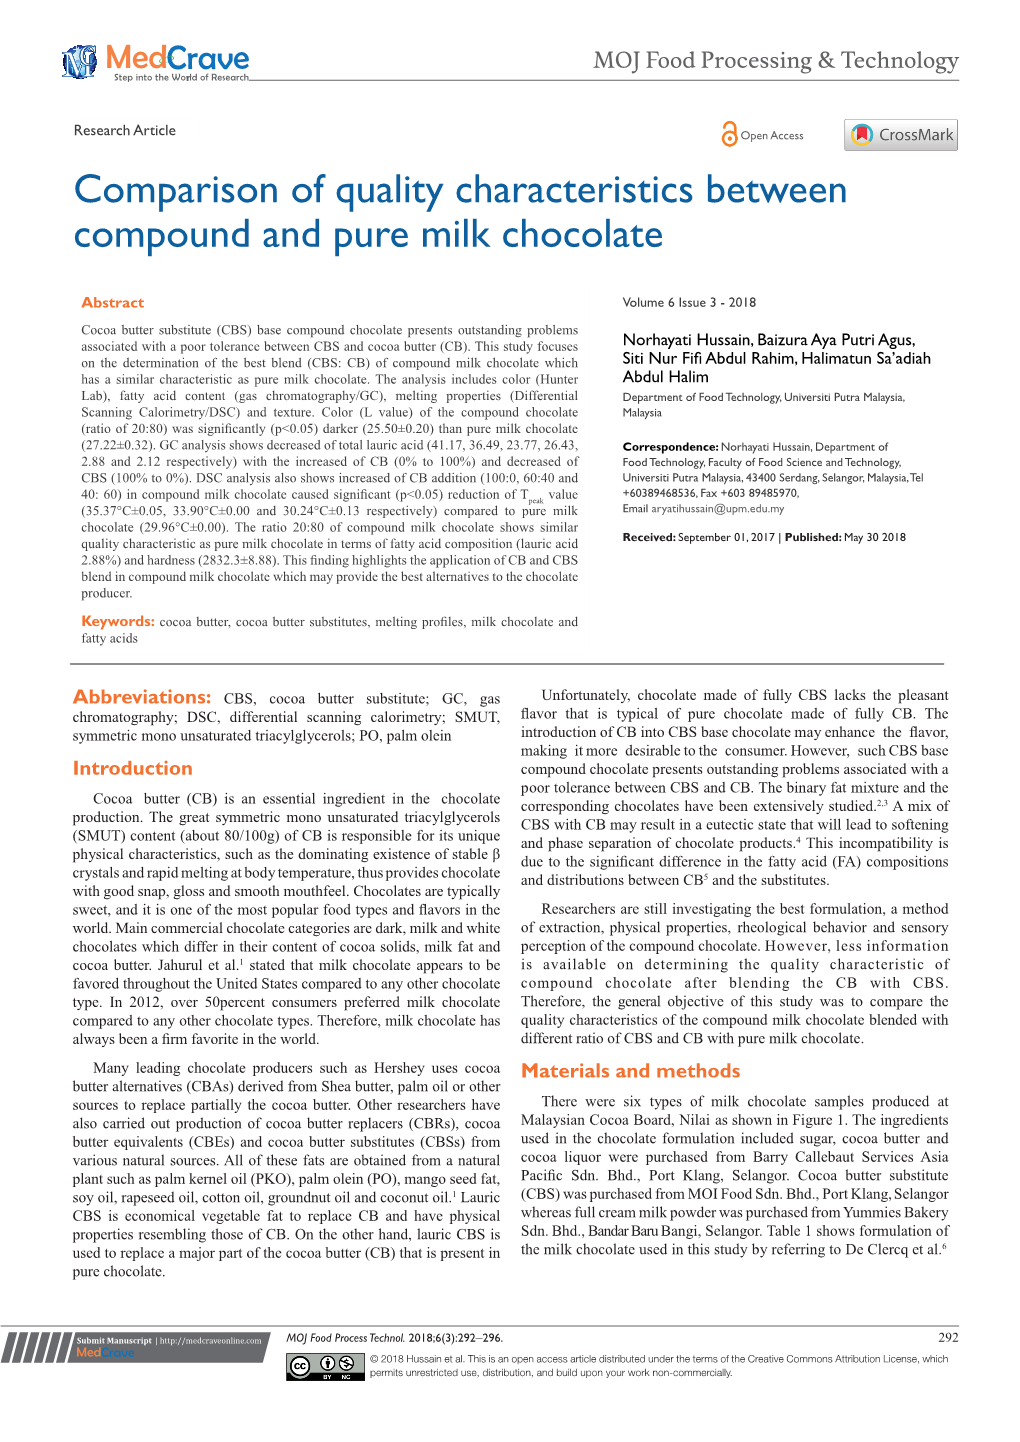 Comparison of Quality Characteristics Between Compound and Pure Milk Chocolate